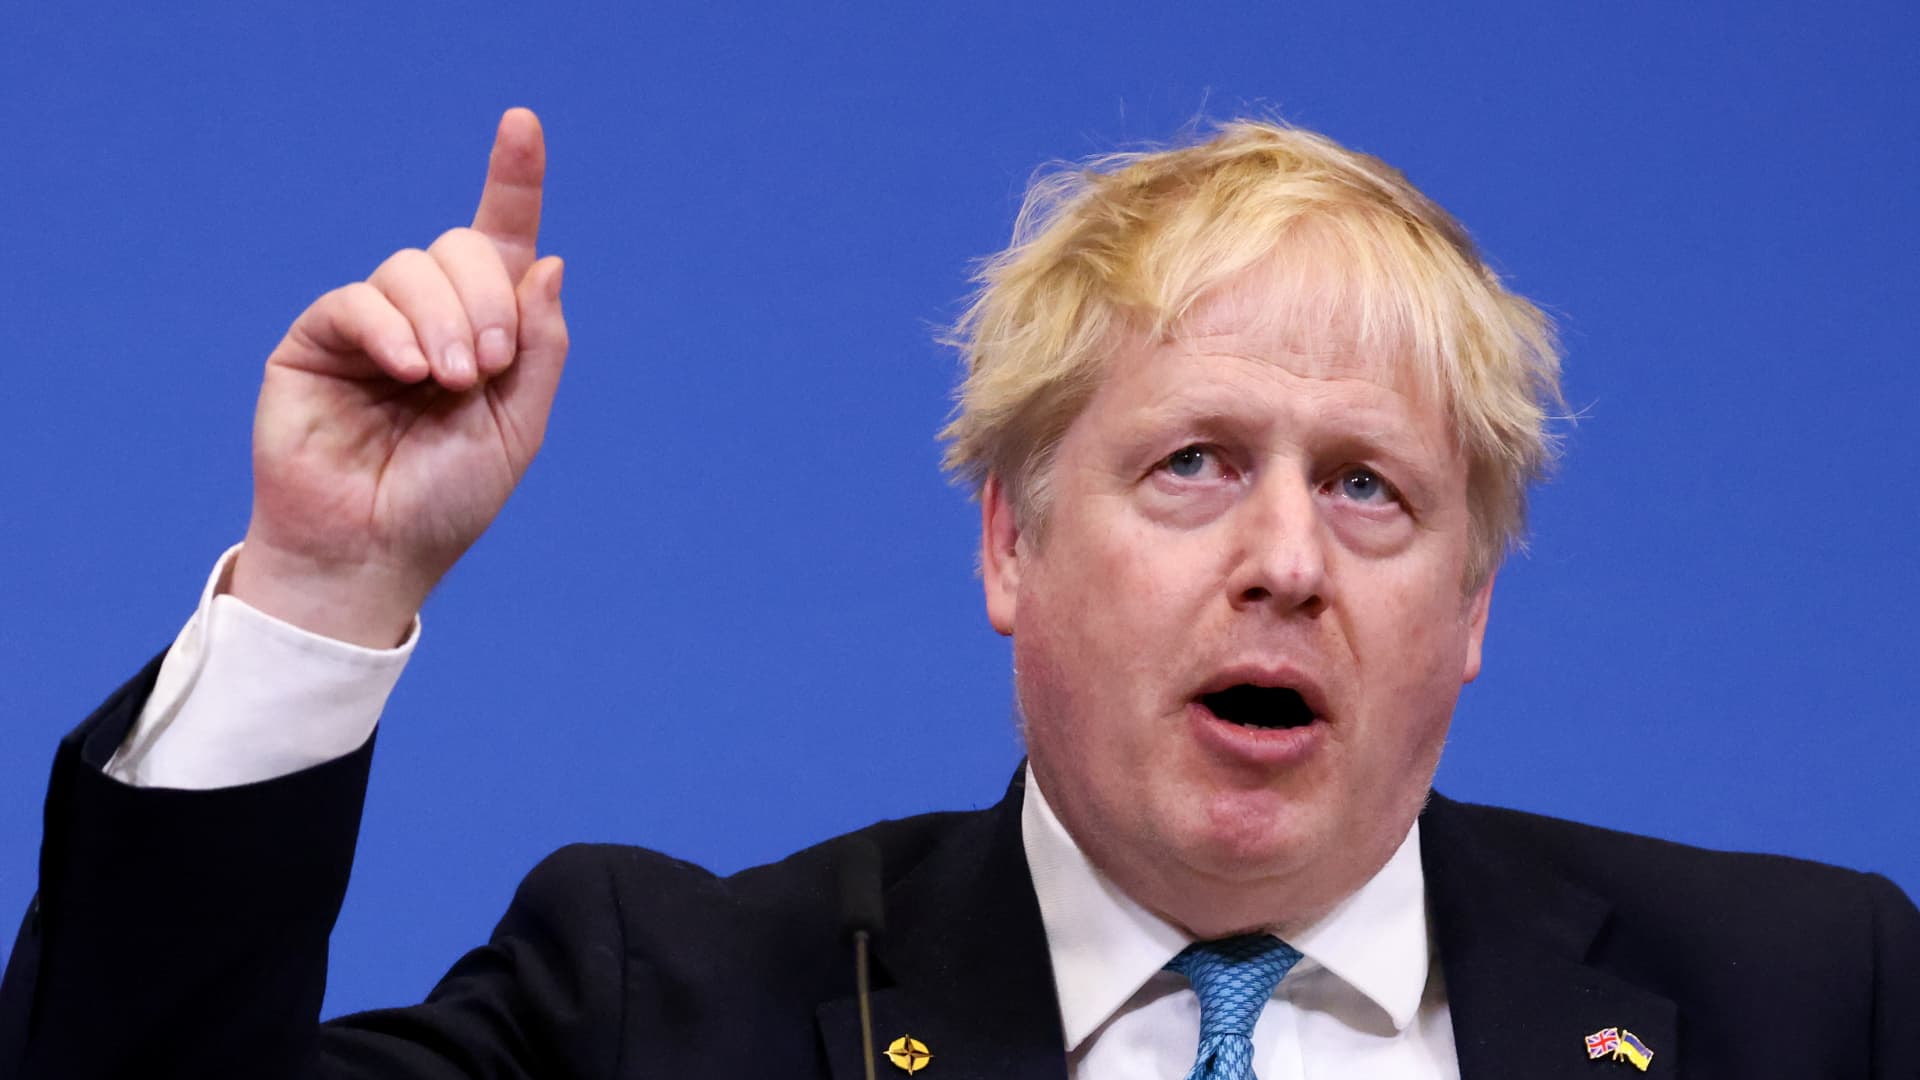 Britain's Prime Minister Boris Johnson addresses the media during a press conference following a NATO summit on Russia's invasion of Ukraine on March 24, 2022.